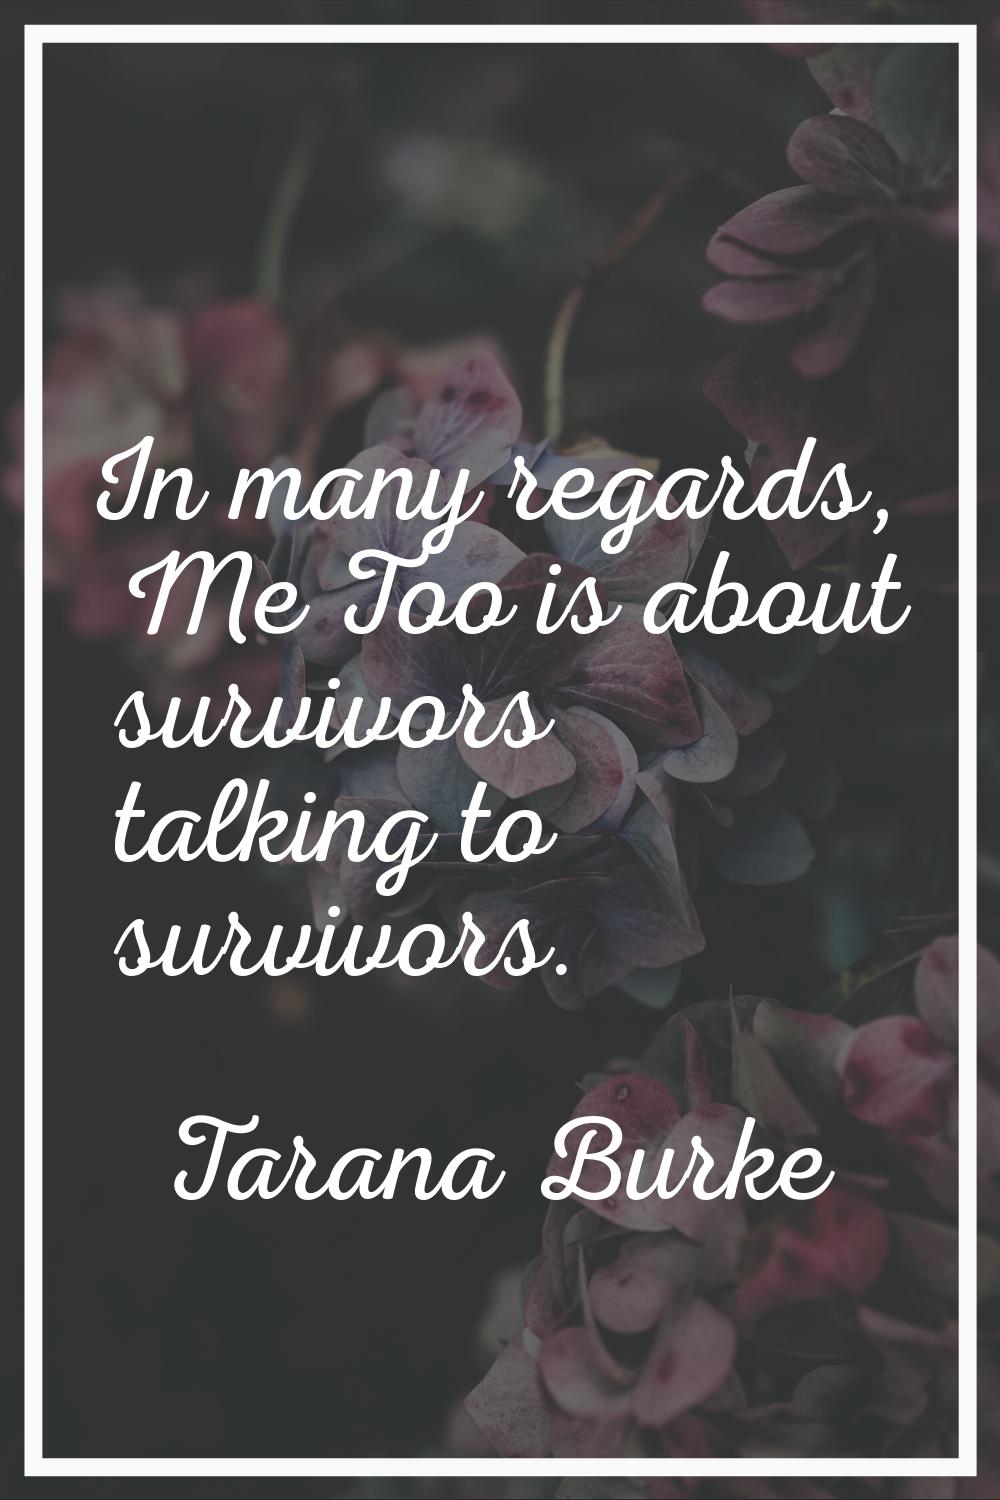 In many regards, Me Too is about survivors talking to survivors.